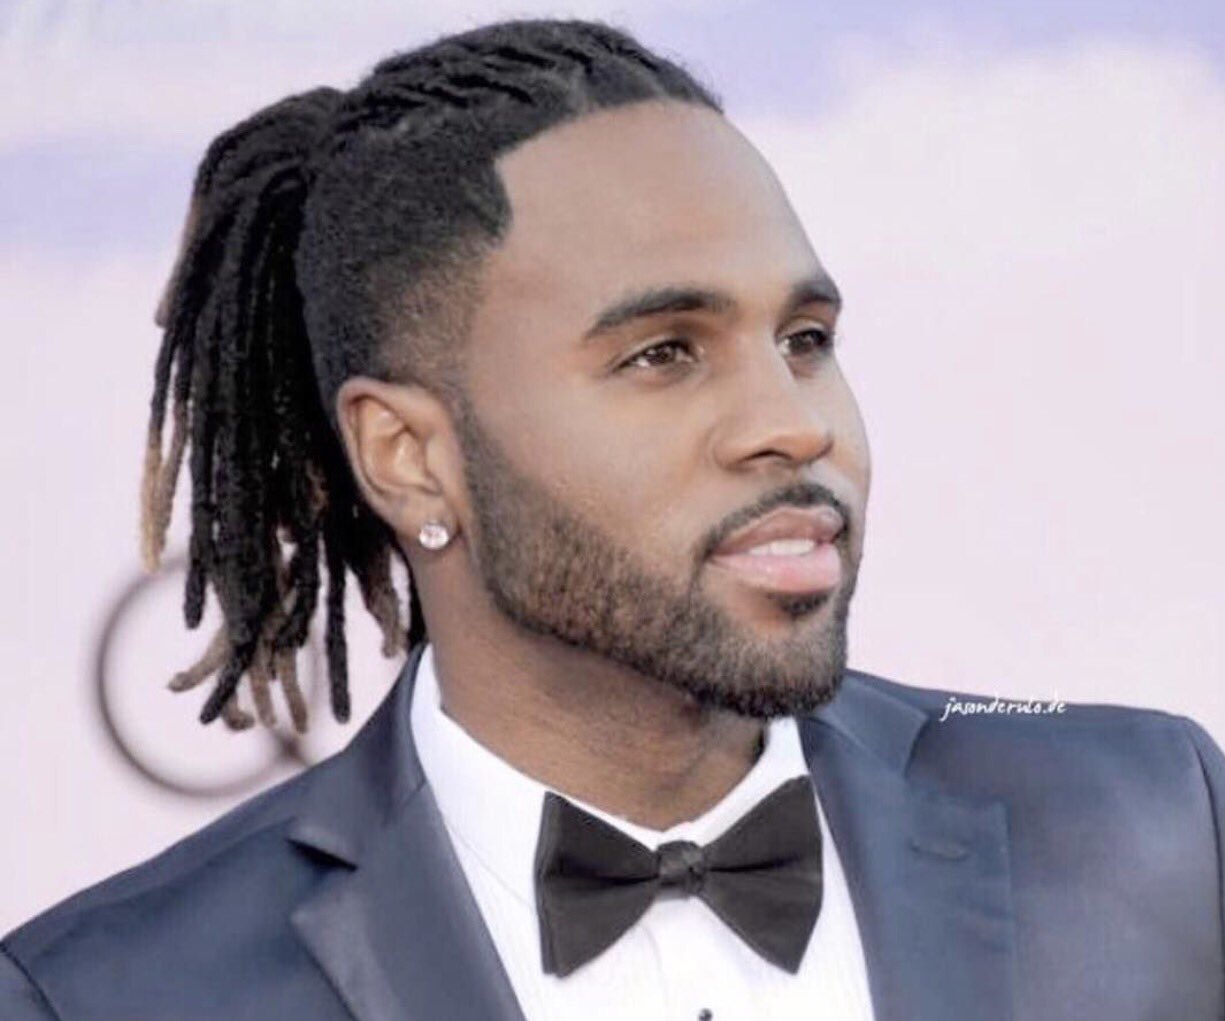 Jason Derulo appears to knock Will Smith's front teeth out in golf lesson